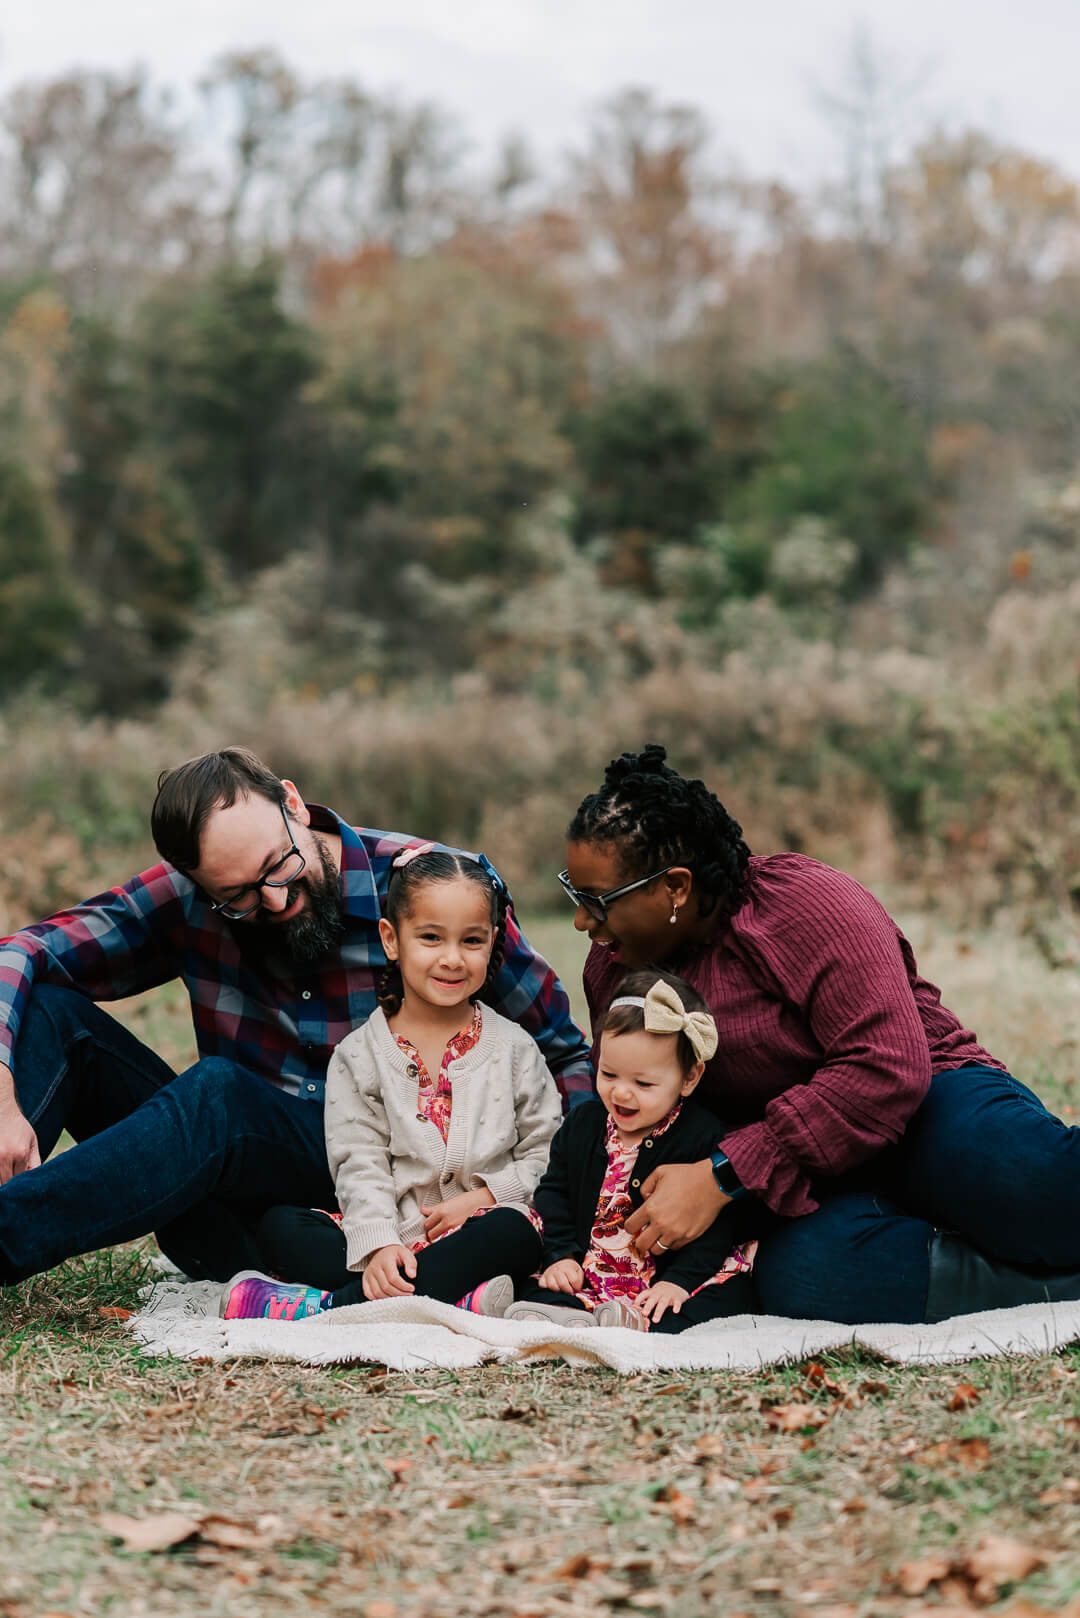 A mom and dad sit on a picnic blanket playing with their two toddler daughters after finding a mclean pediatrician